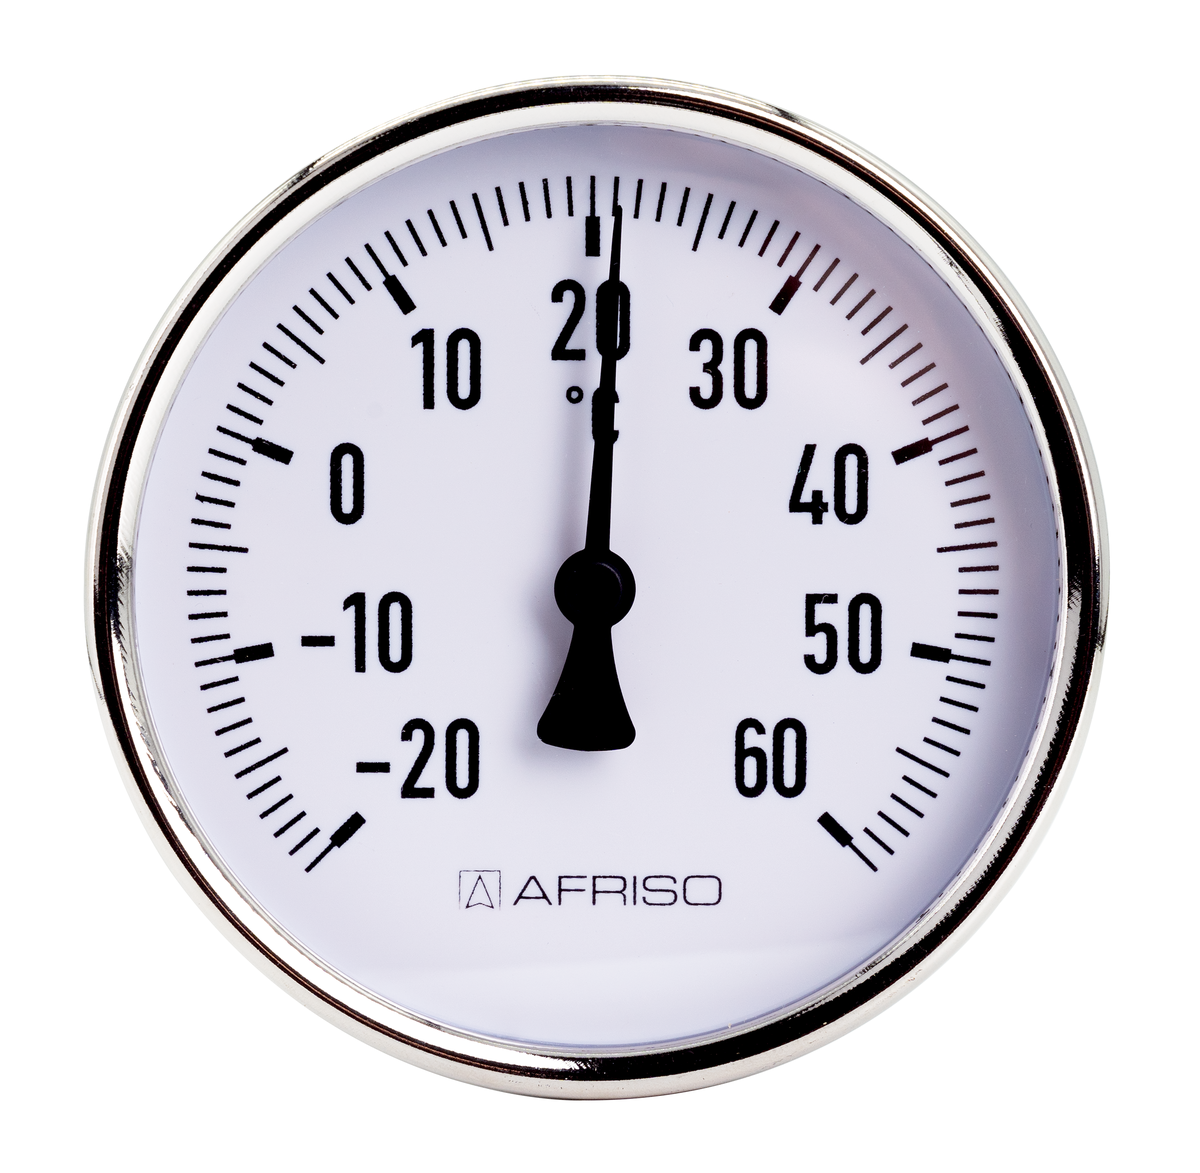 AFRISO Bimetall-Thermometer BiTh 50 ST 0/60C 40mm G1/2B axial Kl.2 VOR 88310 88320 88330 88340 88360 88370 88380 88390 88420 88430 88440 88450 88470 88480 88490 88500 88520 88530 88540 88550 88570 88580 88590 88600 88630 88640 88650 88660 88680 88690 88700 88710 88730 88740 88750 88760 88770 88790 88800 88810 88820 88850 88860 88870 88880 88900 88910 88920 88930 88950 88960 88970 88980 88990 89010 89020 89030 89040 object_image_98577imagemain_en